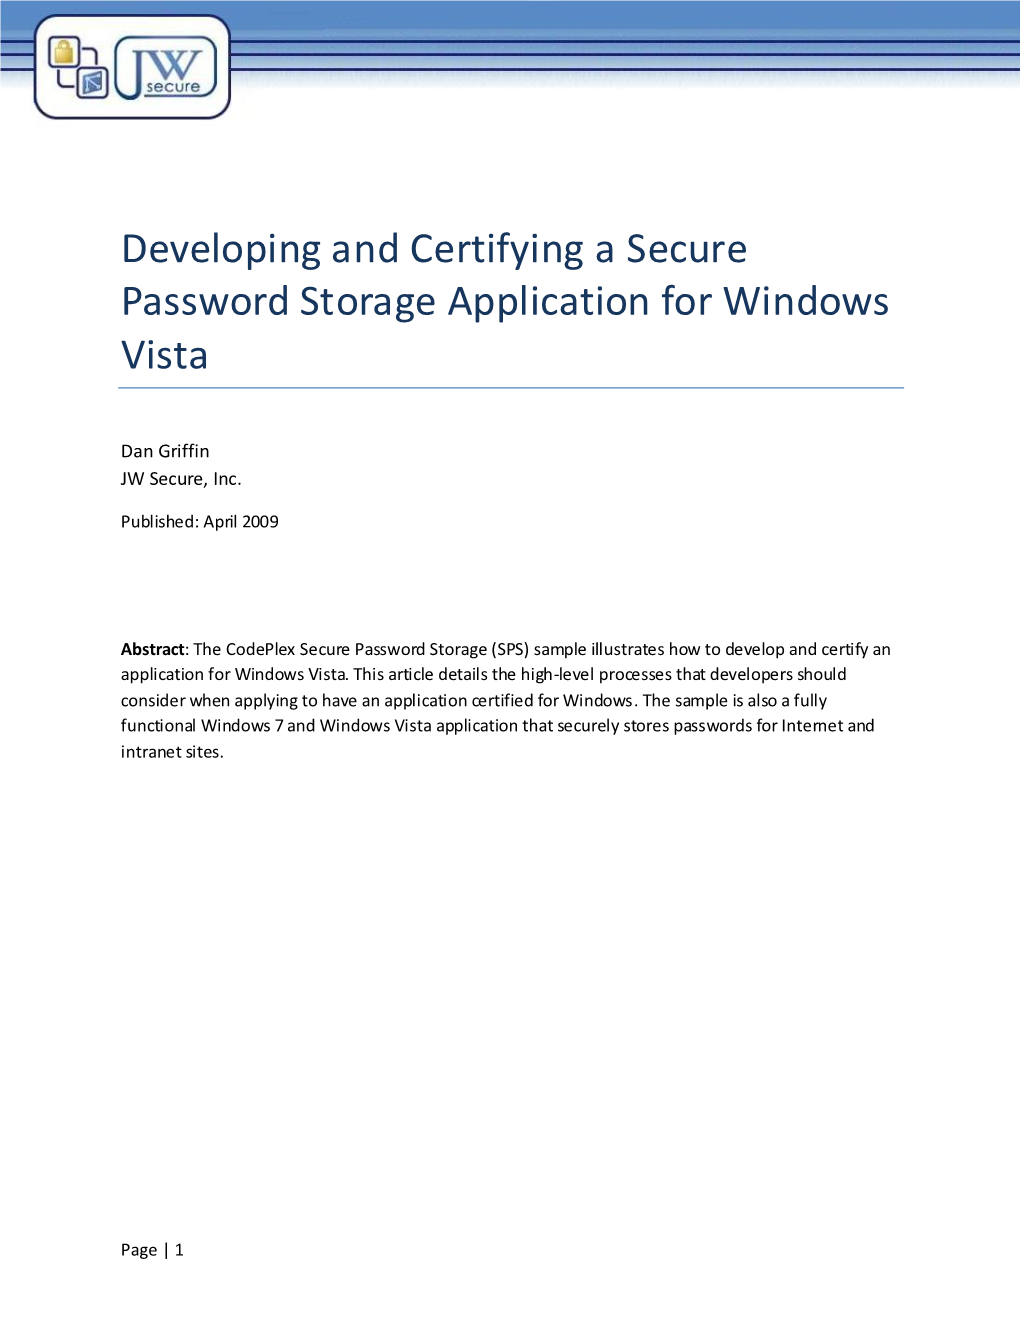 Developing and Certifying a Secure Password Storage Application for Windows Vista